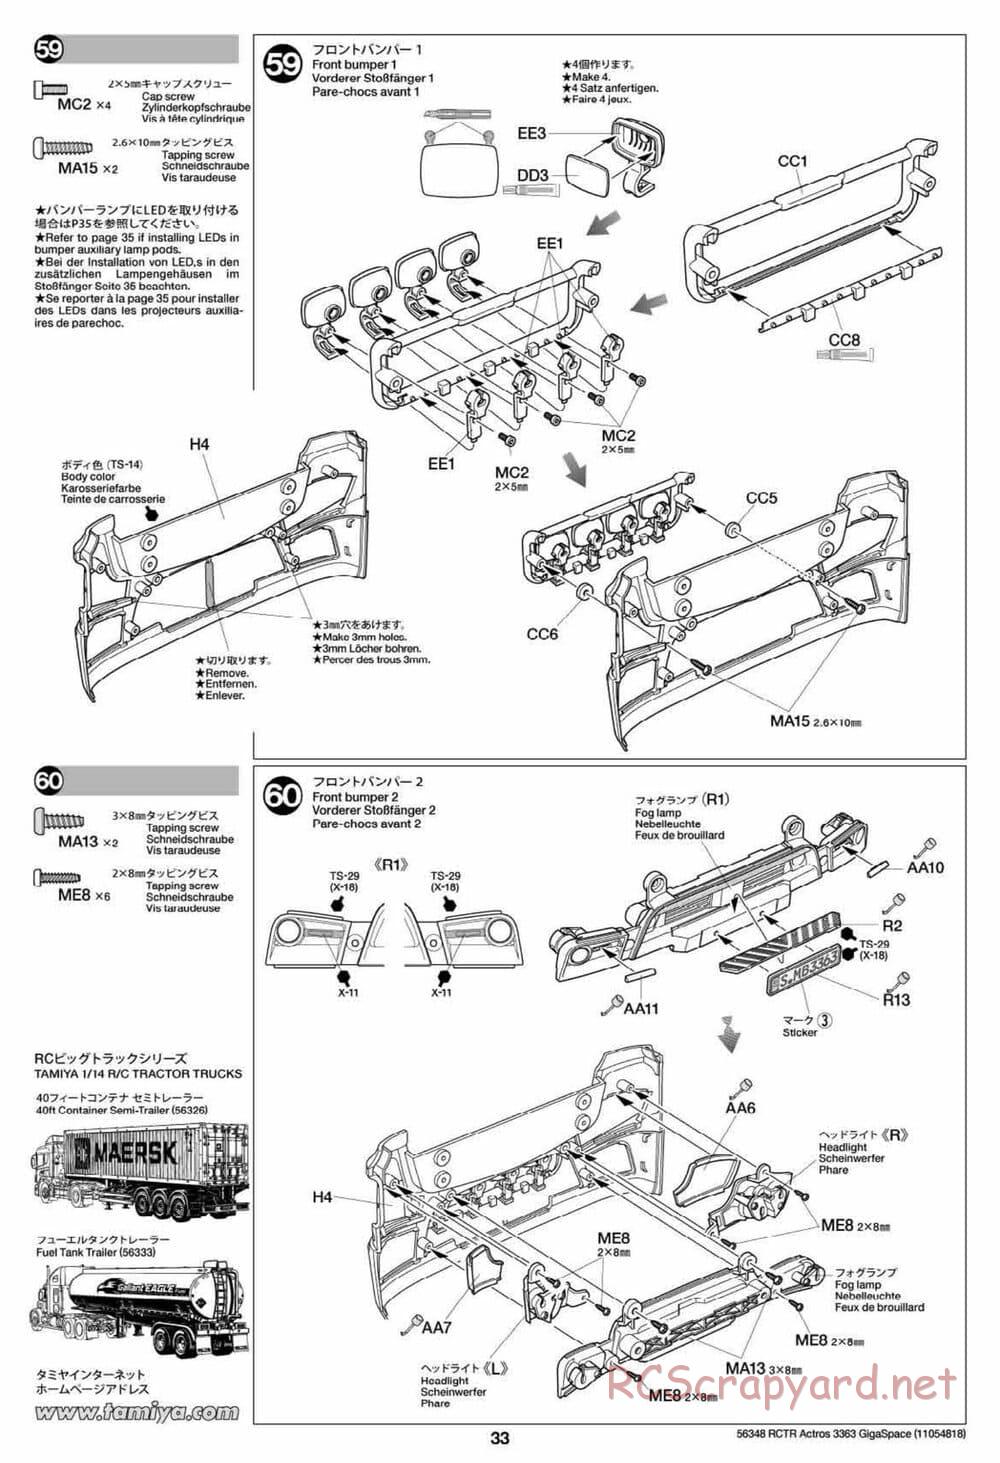 Tamiya - Mercedes-Benz Actros 3363 6x4 GigaSpace Tractor Truck Chassis - Manual - Page 33